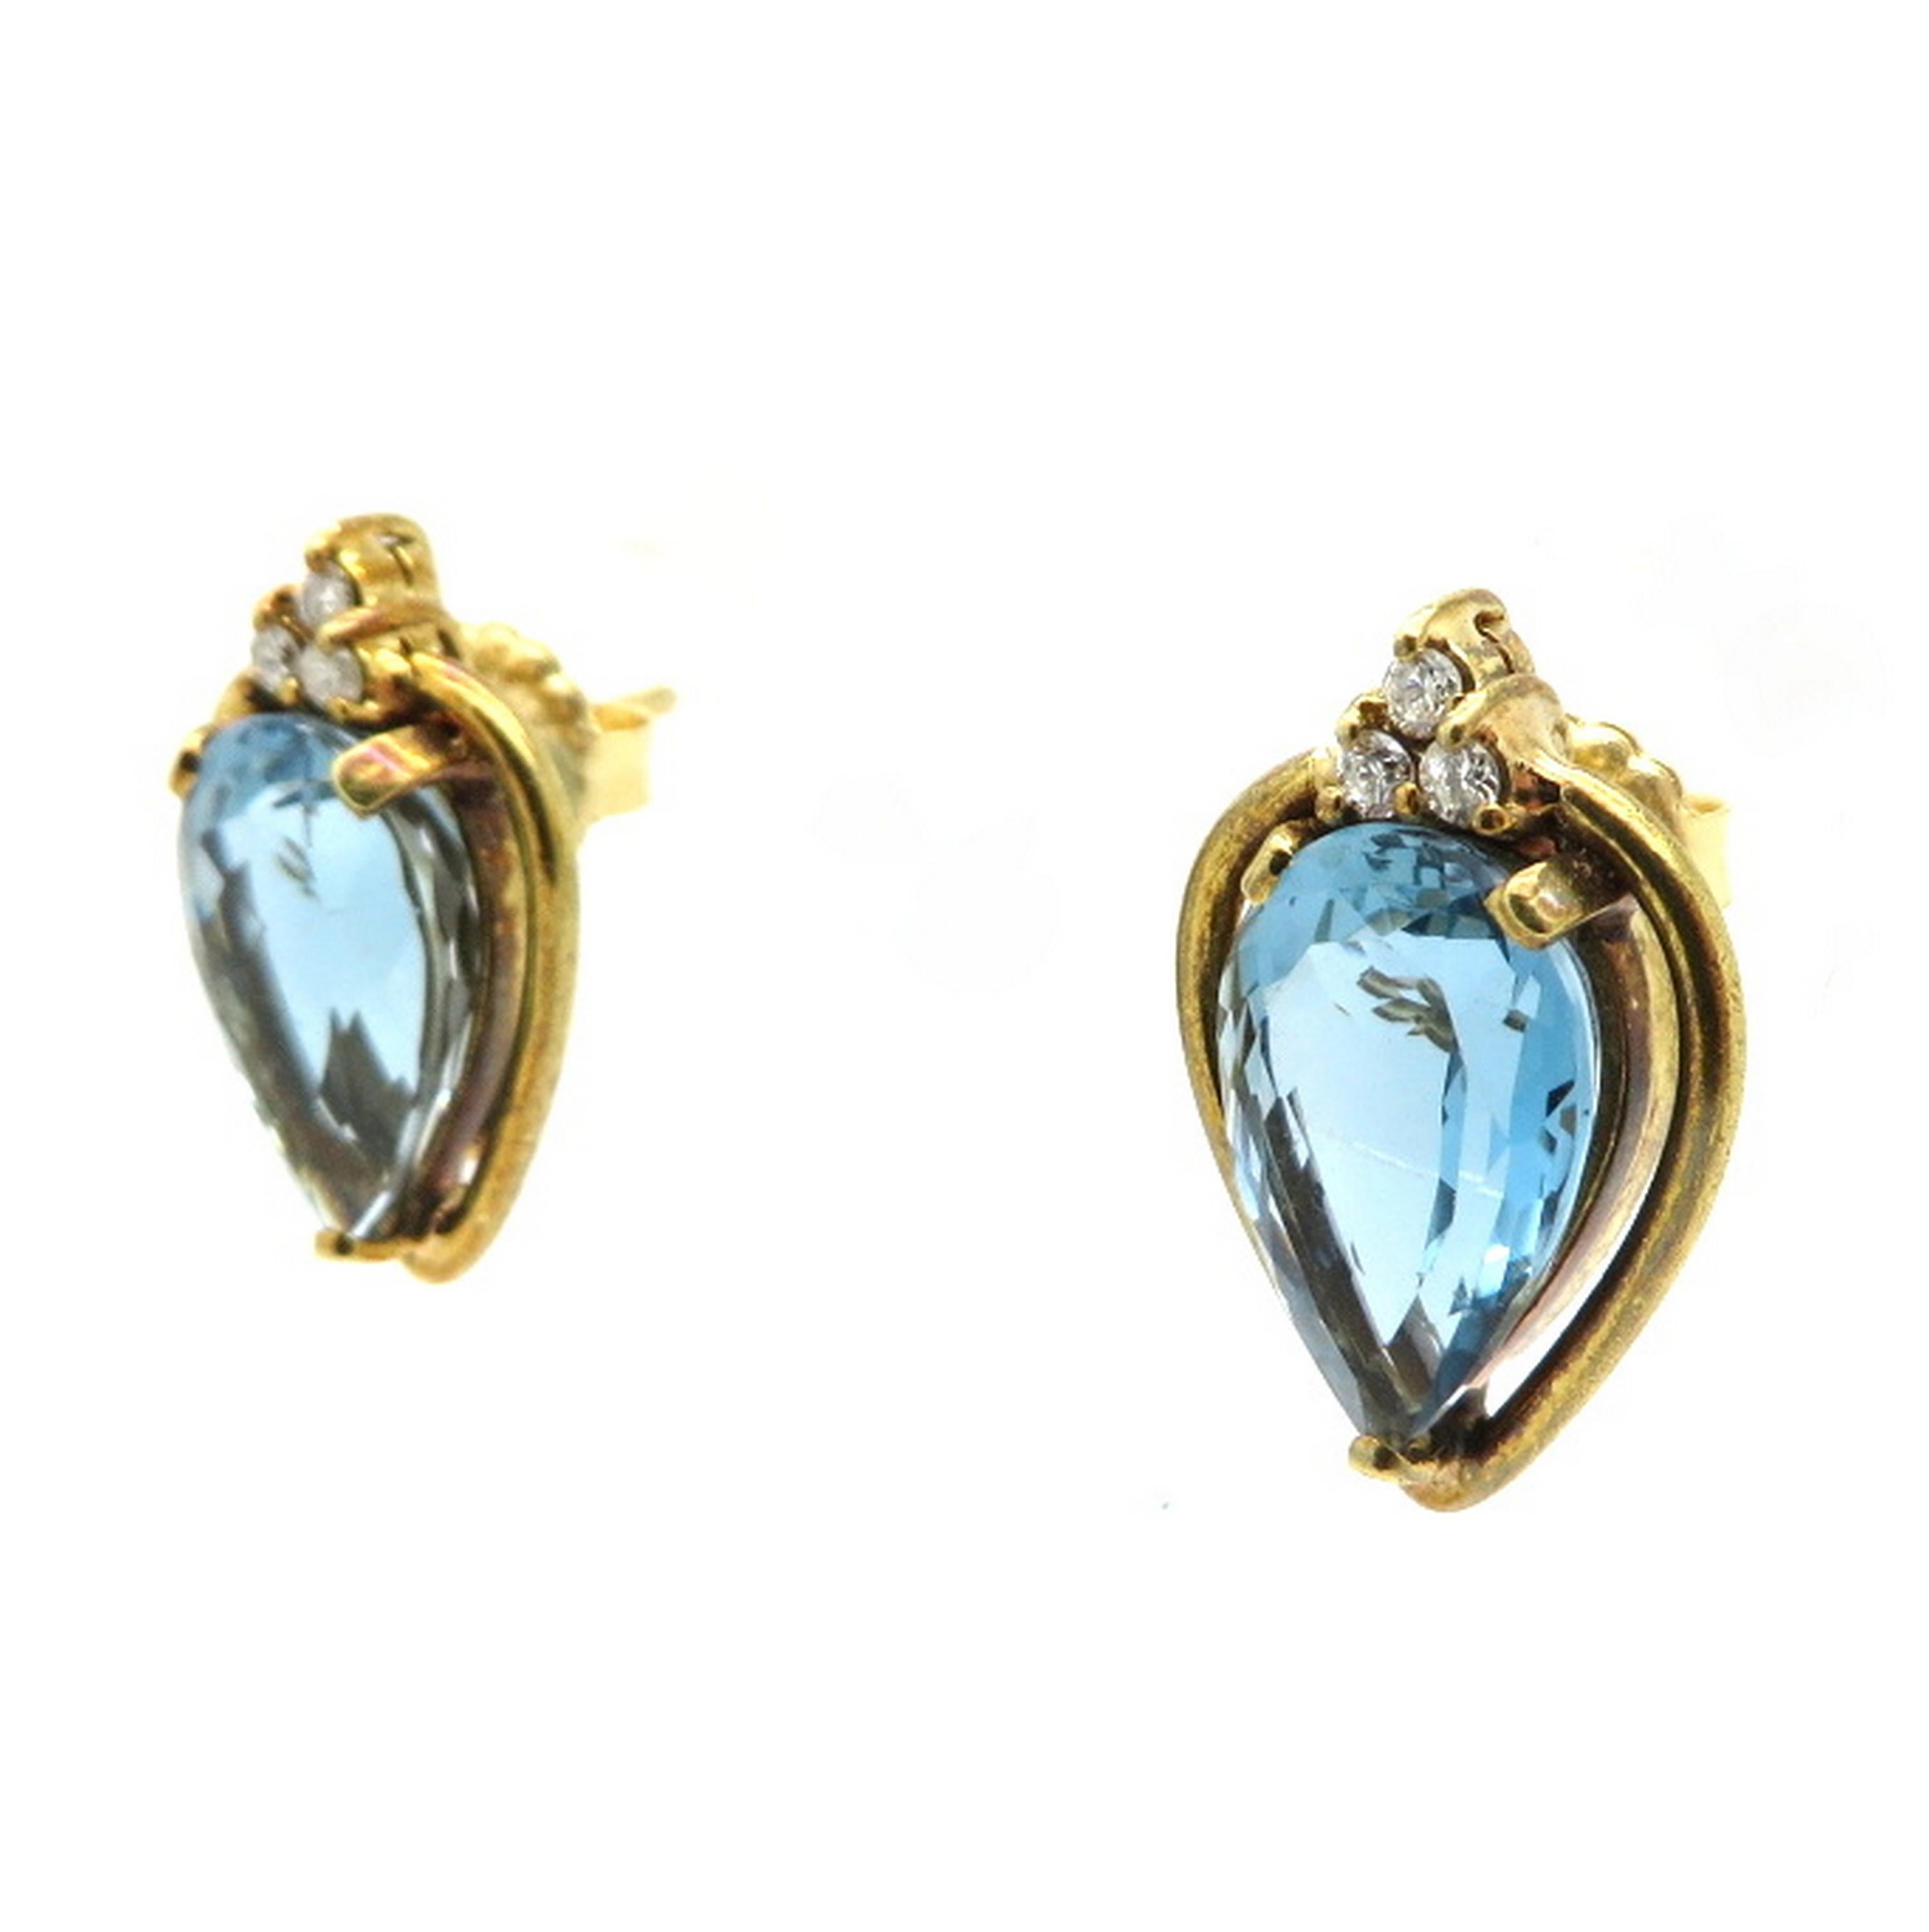 Estate 18 Karat Yellow Gold 8.00 Carat Blue Topaz and Diamond Fashion Earrrings In Excellent Condition For Sale In Scottsdale, AZ